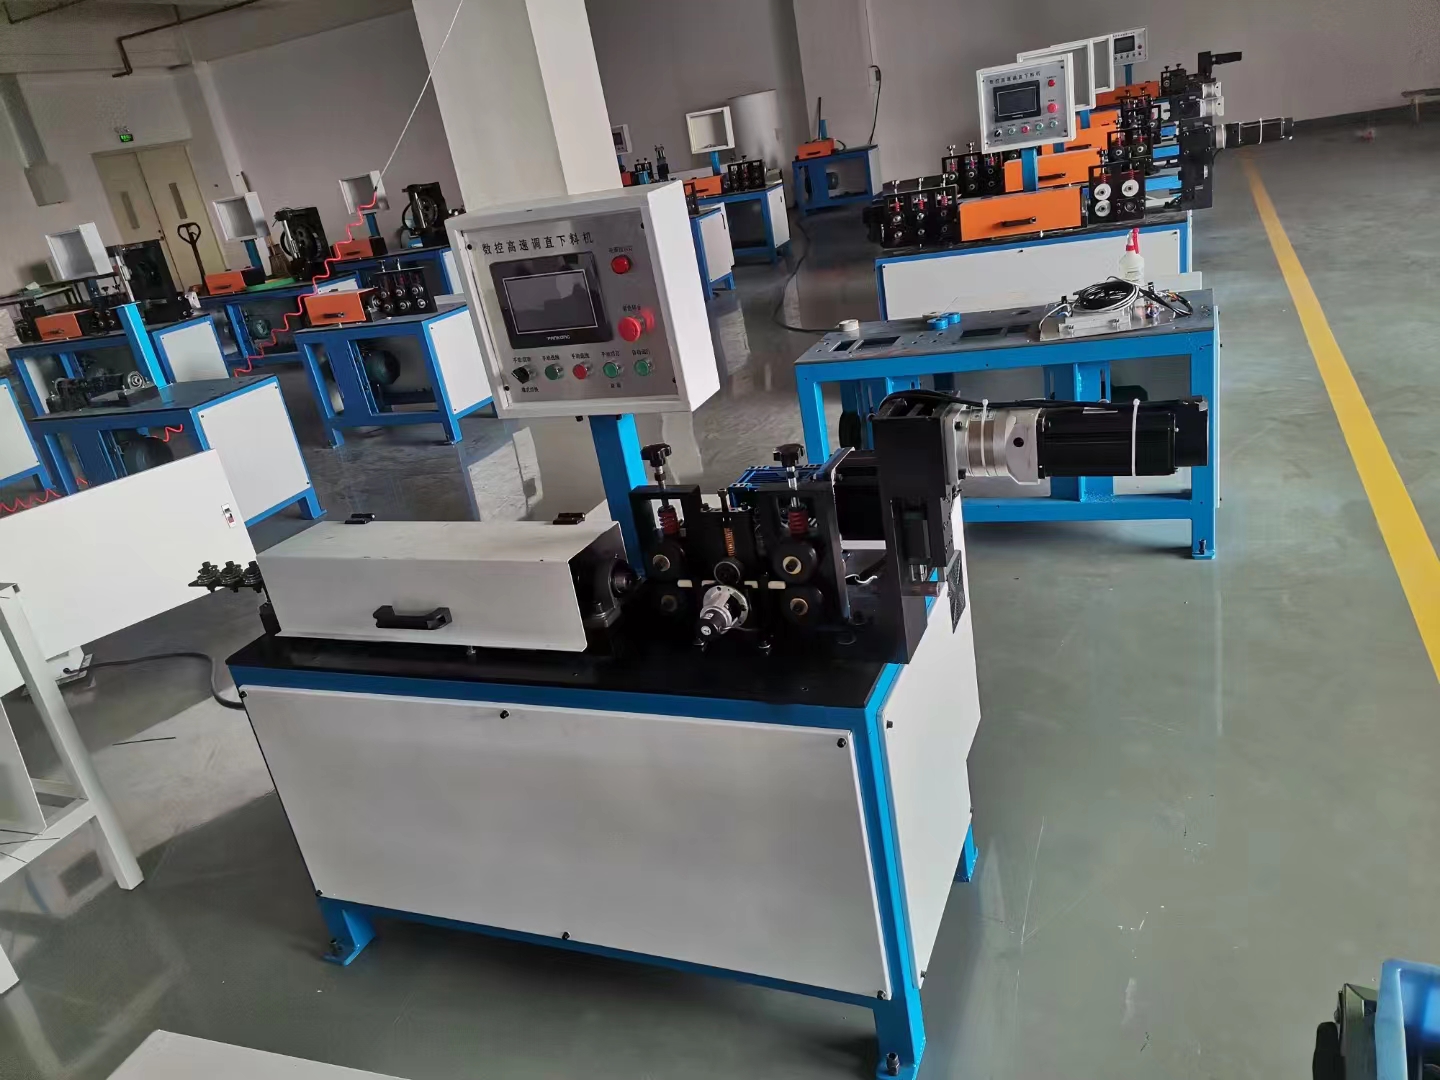 QP High Quality Automatic High Speed Roller Straightener and Cutter Wire Cable Straightening and Cutting Machine